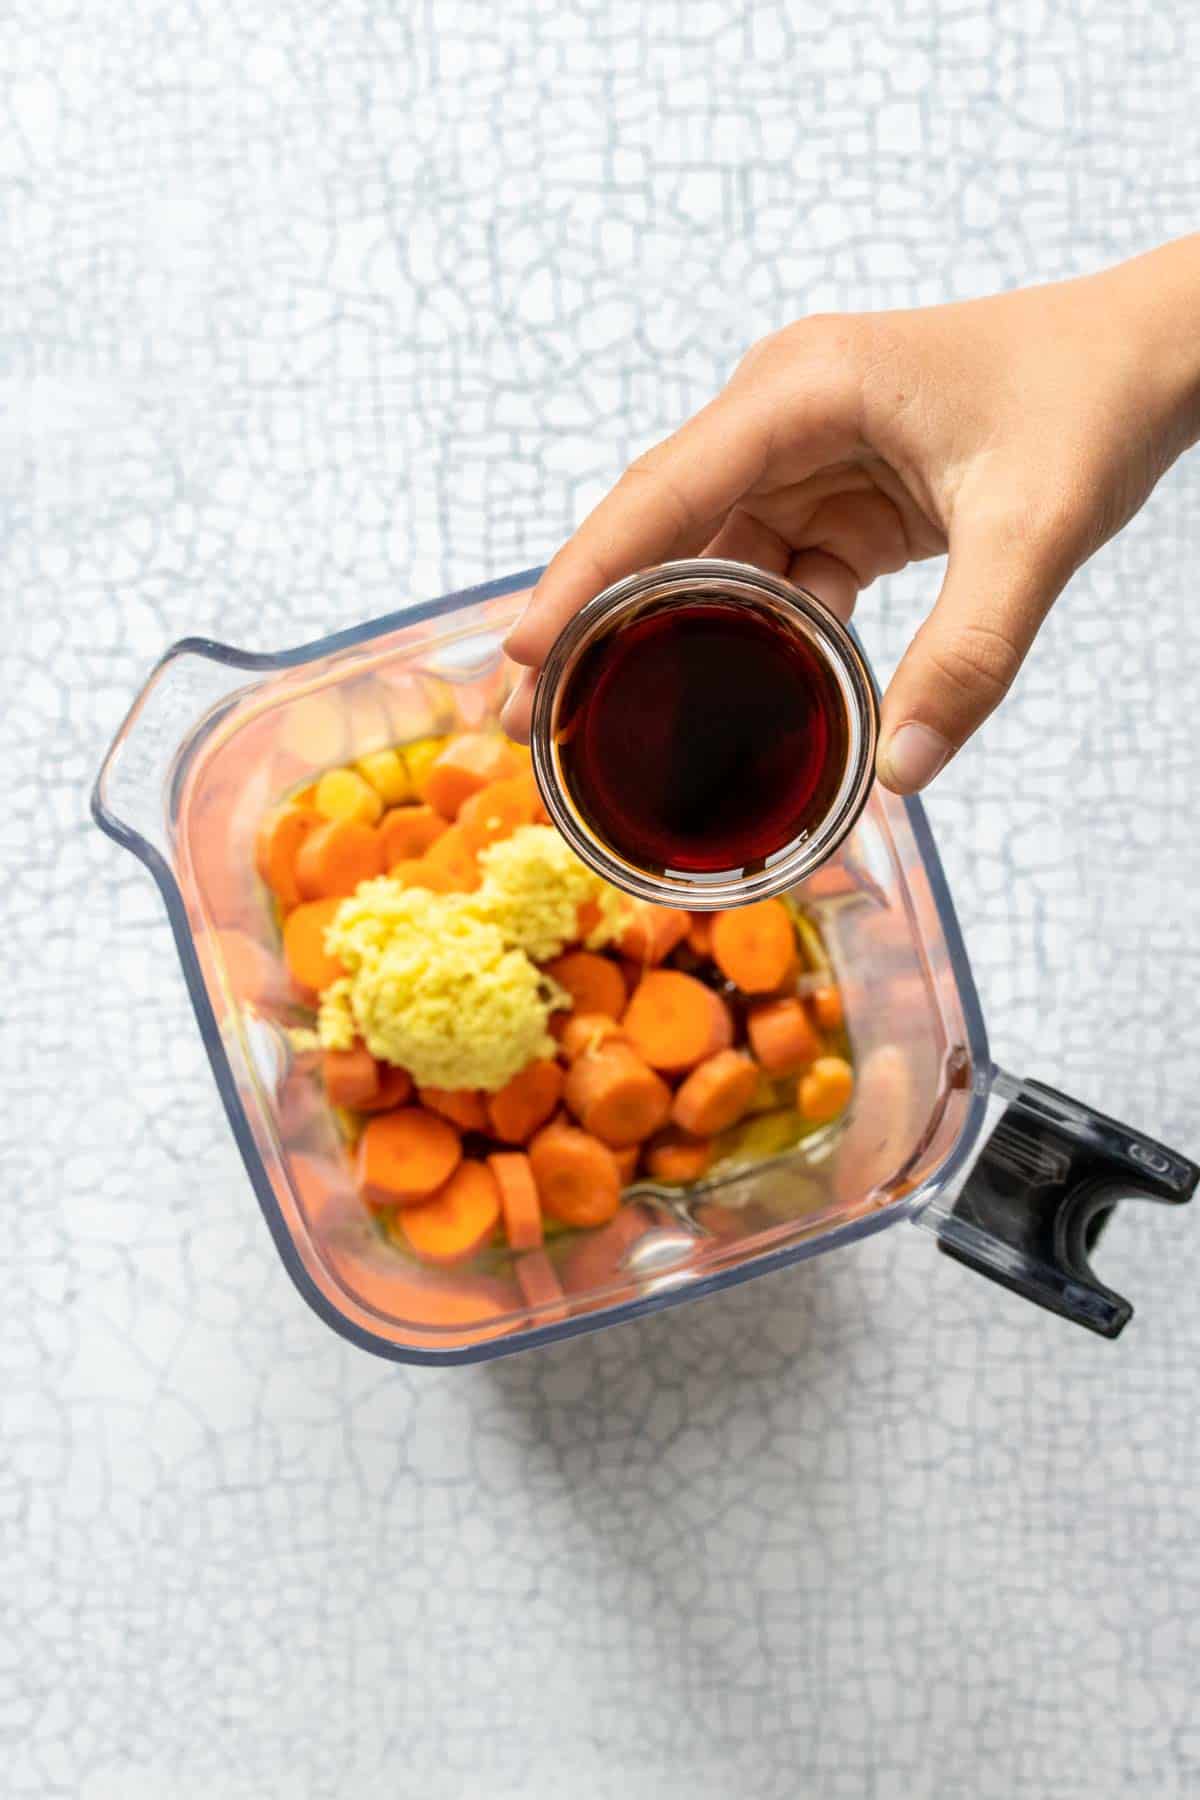 Hand holding a small glass bowl of soy sauce over a blender with carrots, onion and ginger